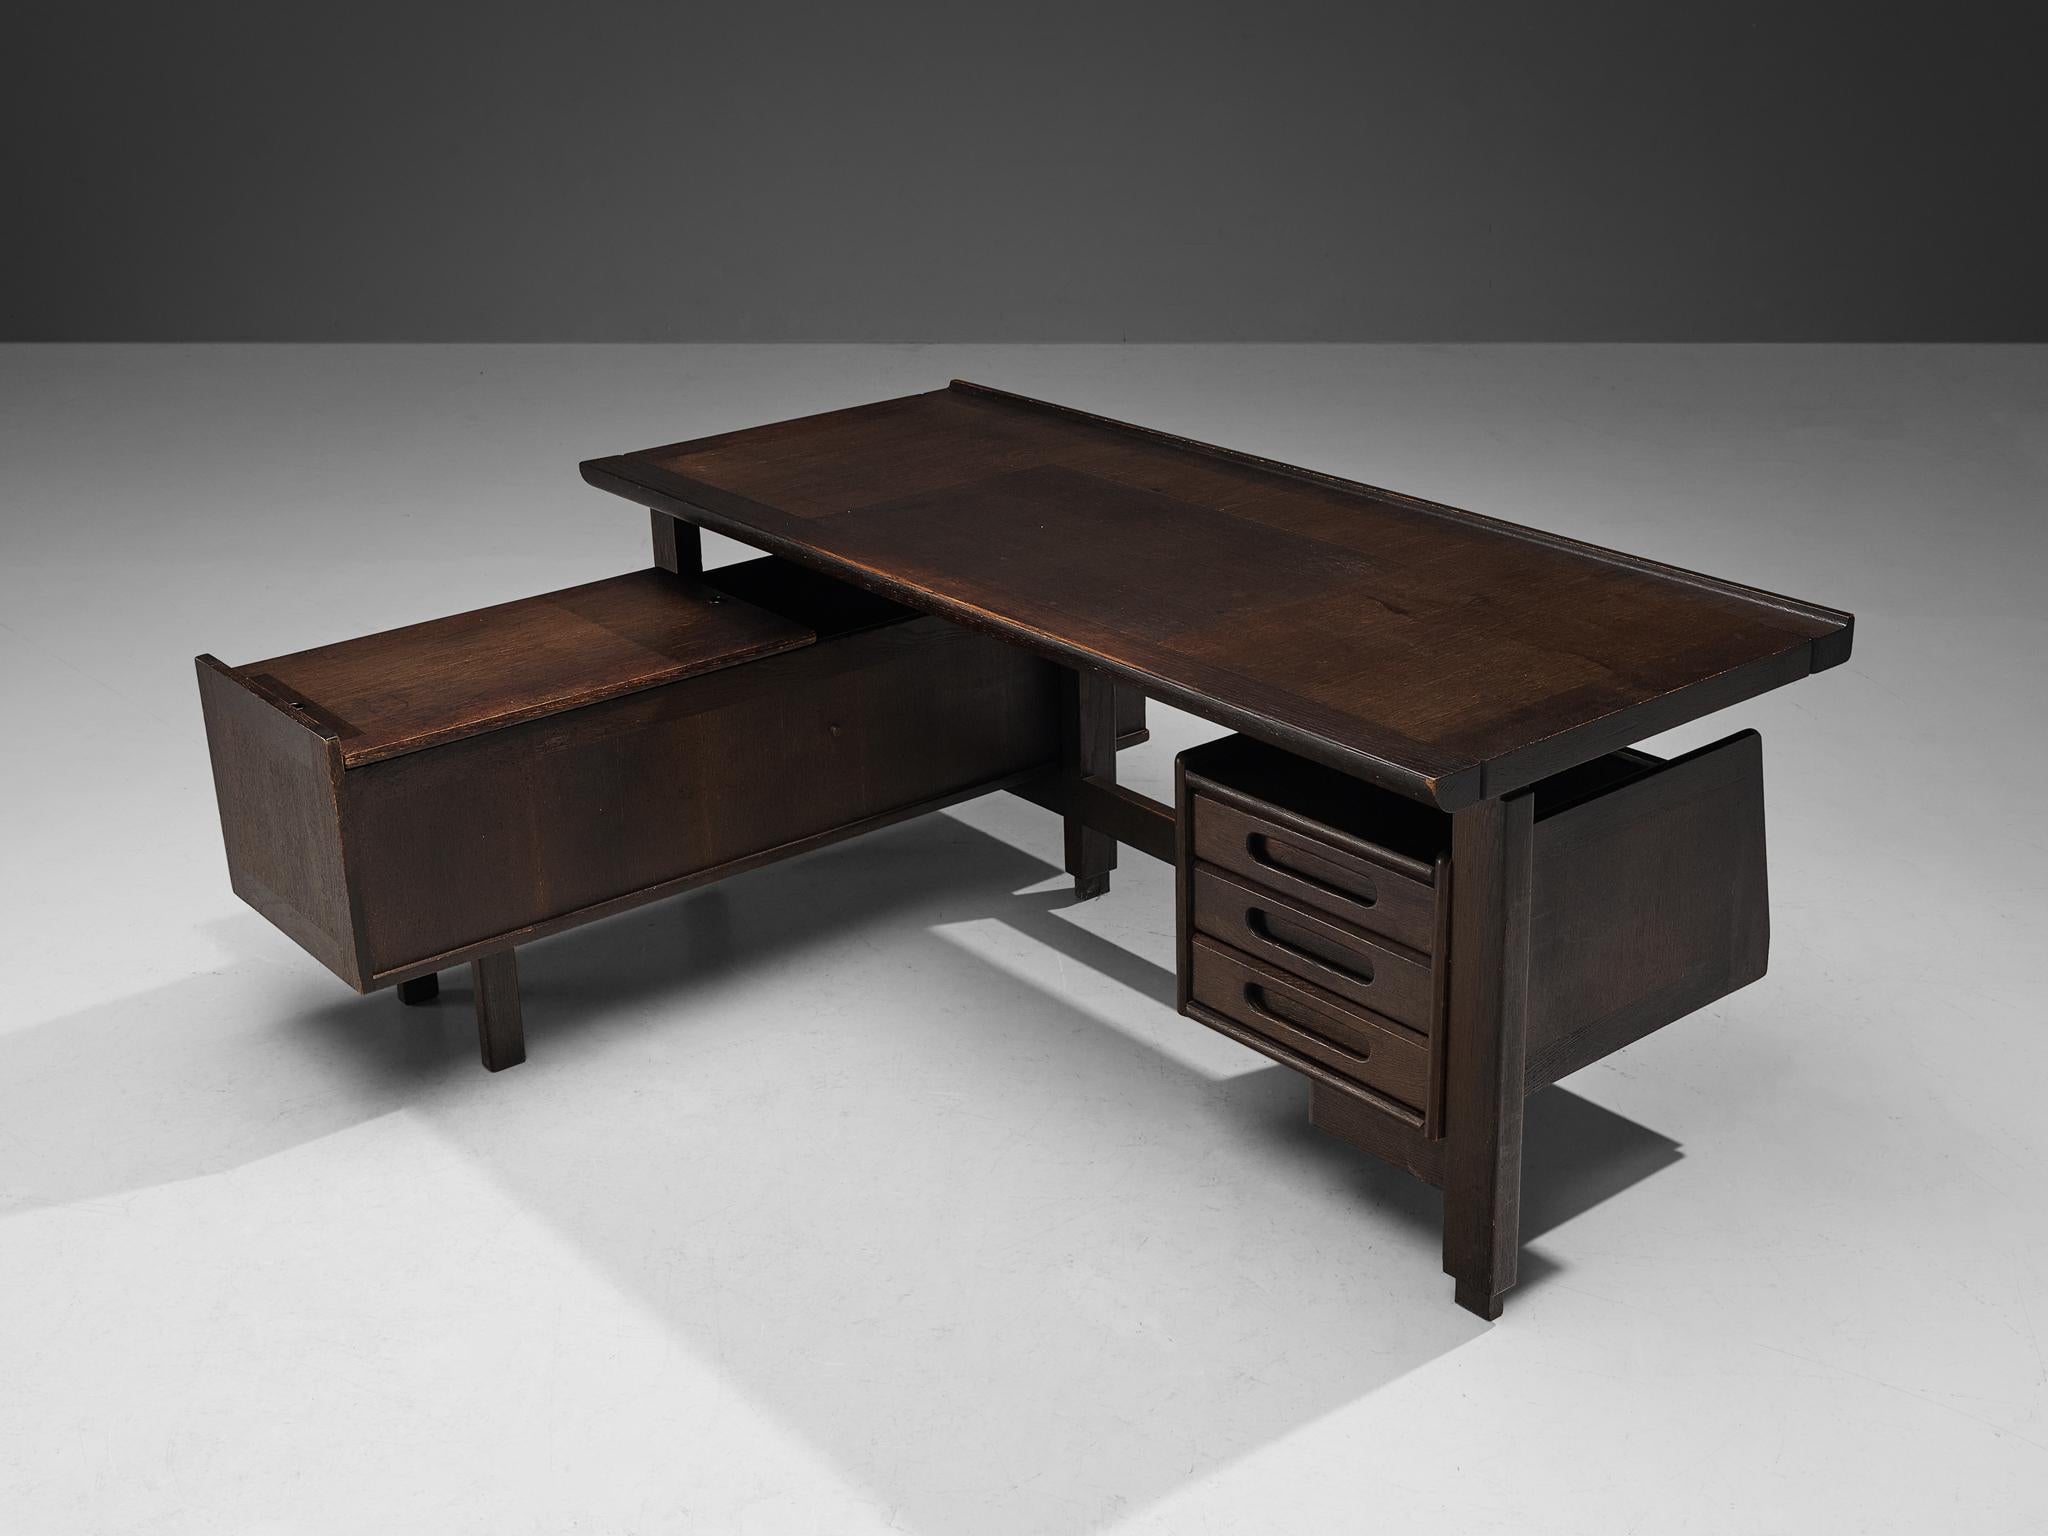 Guillerme et Chambron, corner desk, stained oak, France, 1960s

This executive desk shows the fine craftsmanship and aesthetic characteristics of designer duo Guillerme and Chambron. The stained oak has aged beautifully. The basic construction and